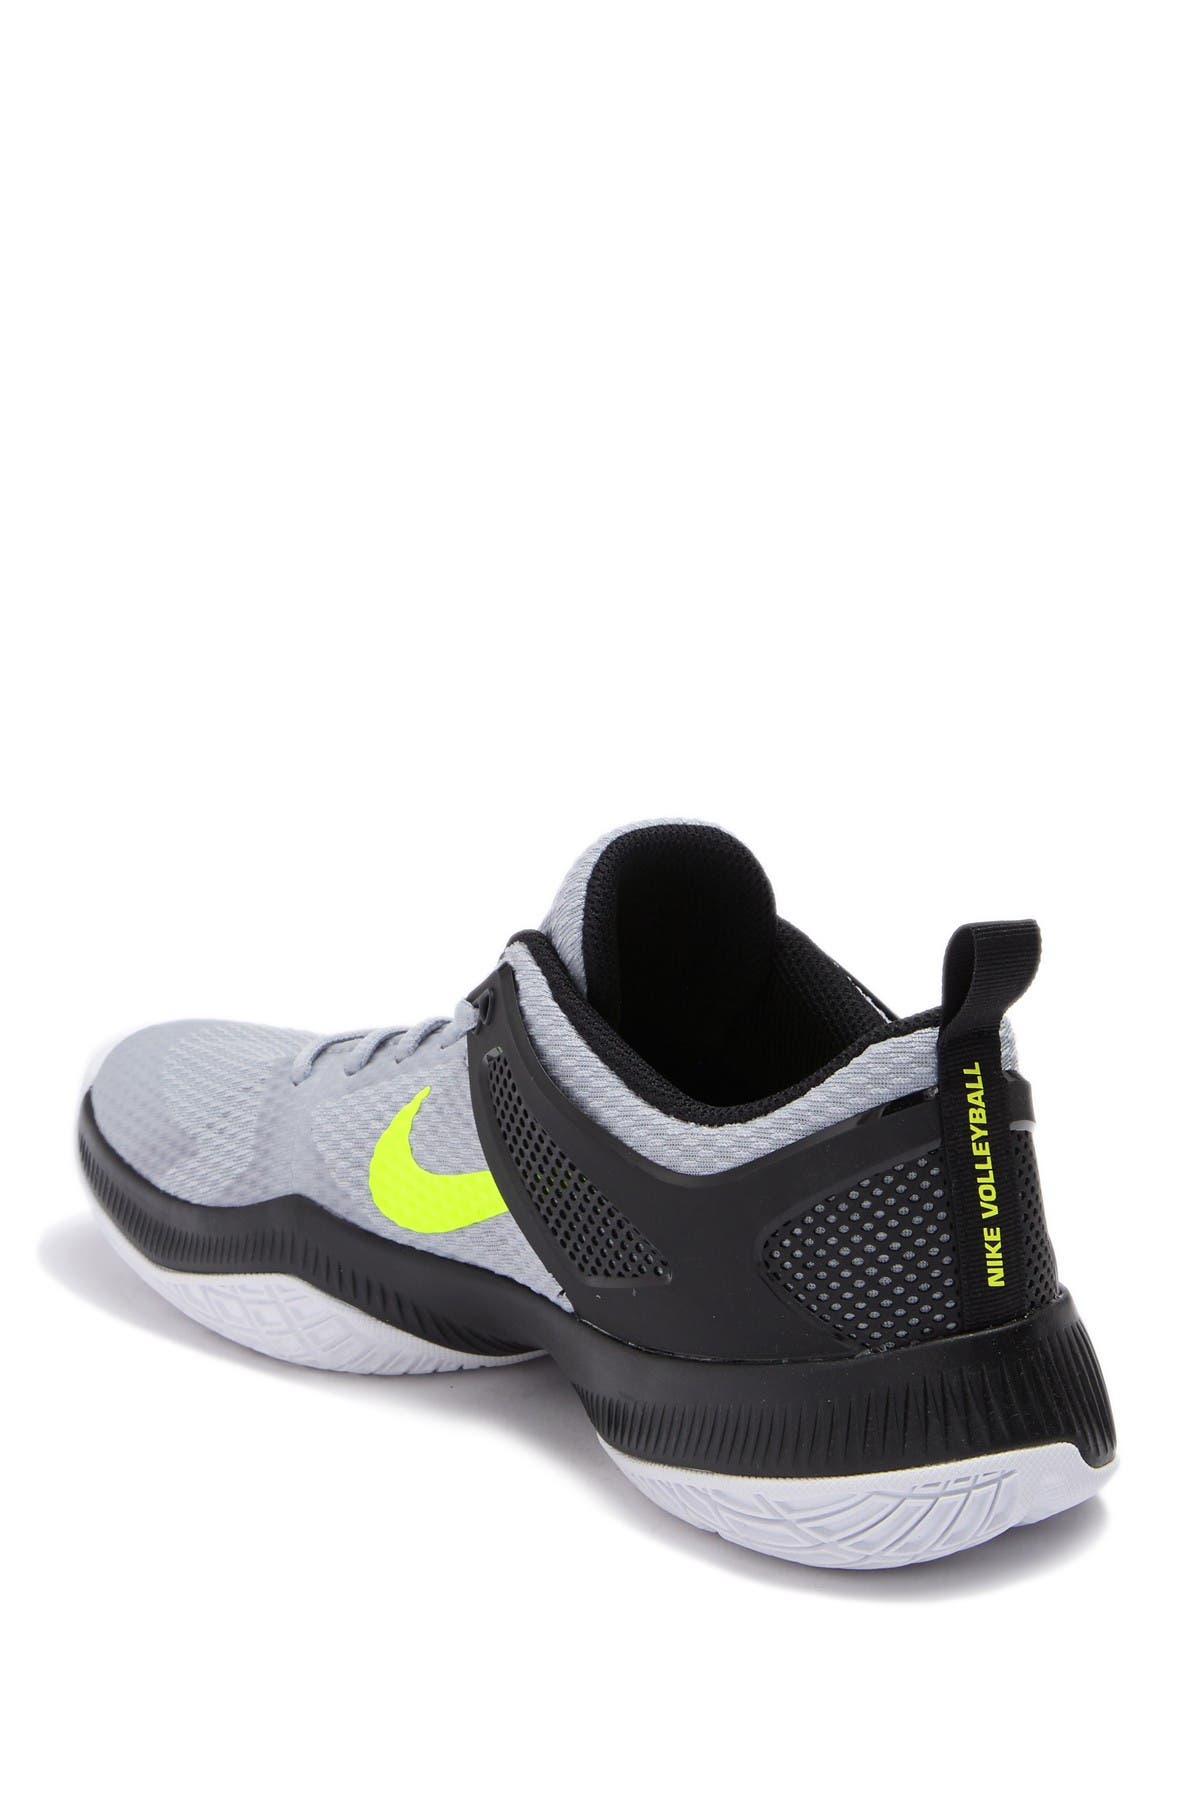 nike air zoom hyper attack volleyball